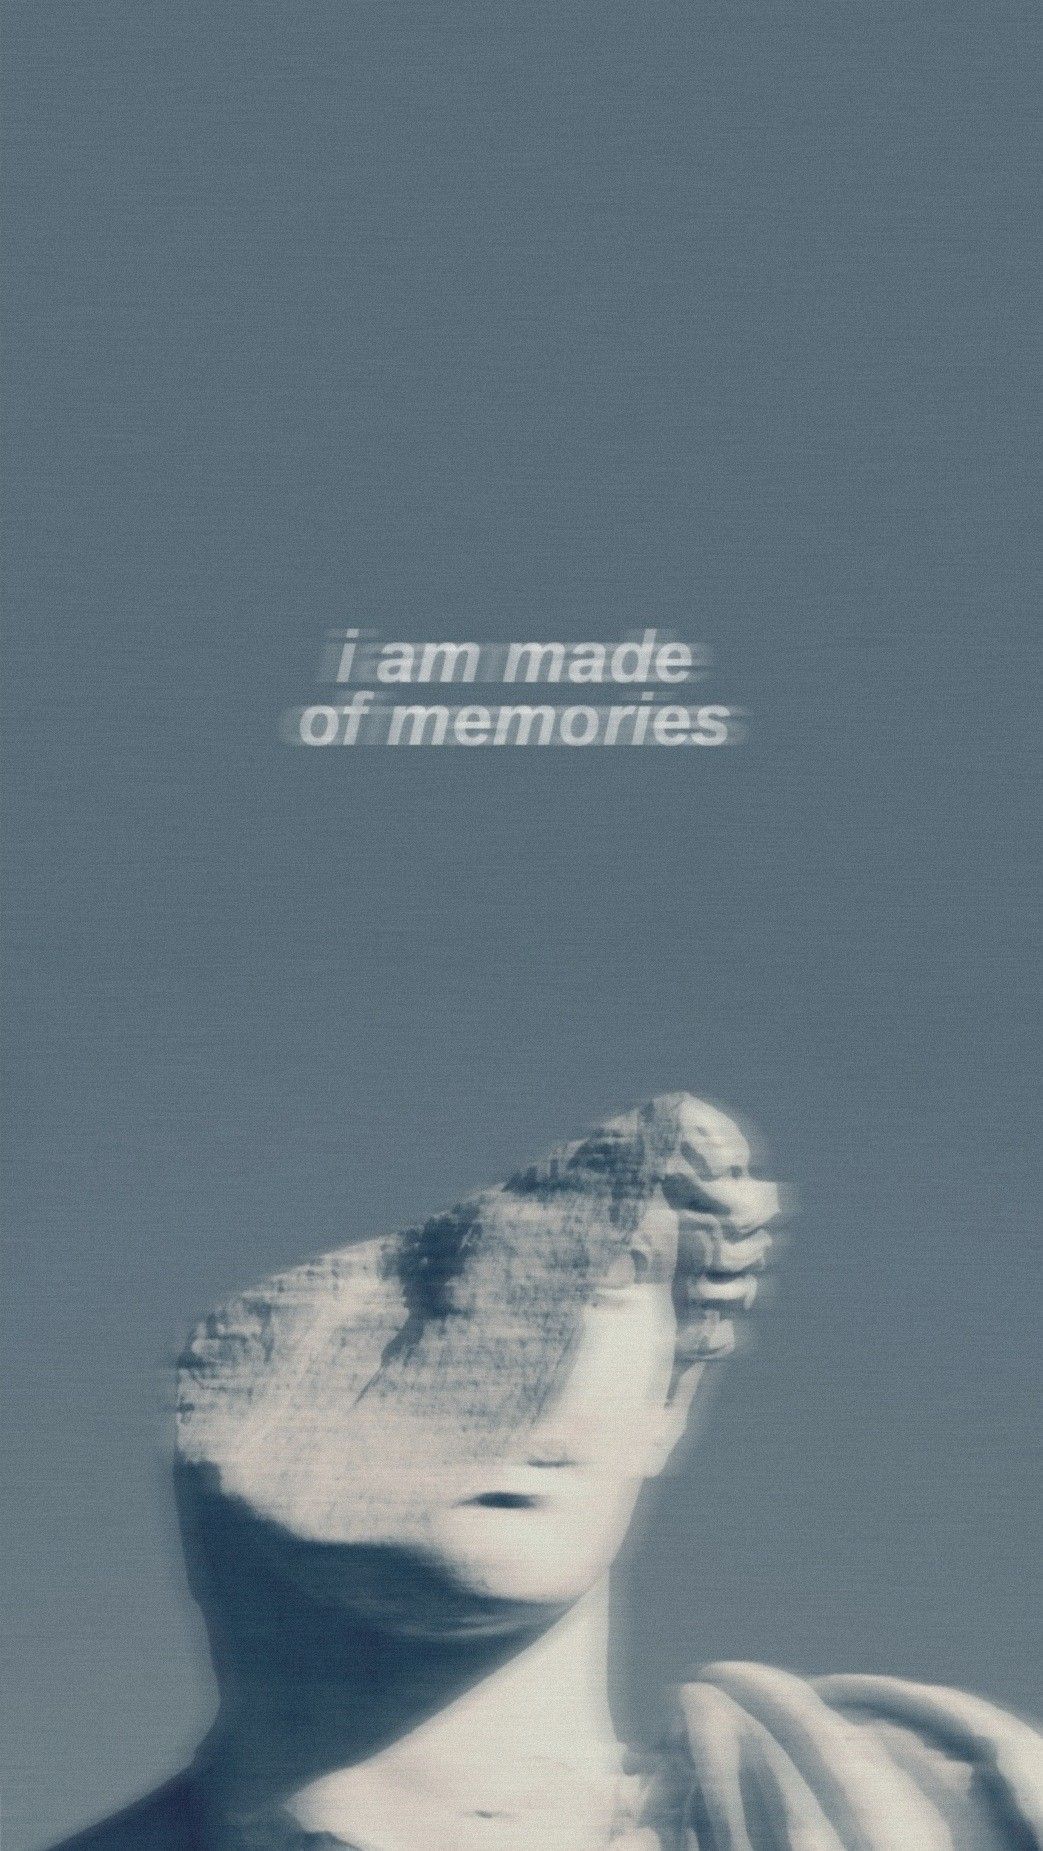 A poster that says i am made of memories - Greek mythology